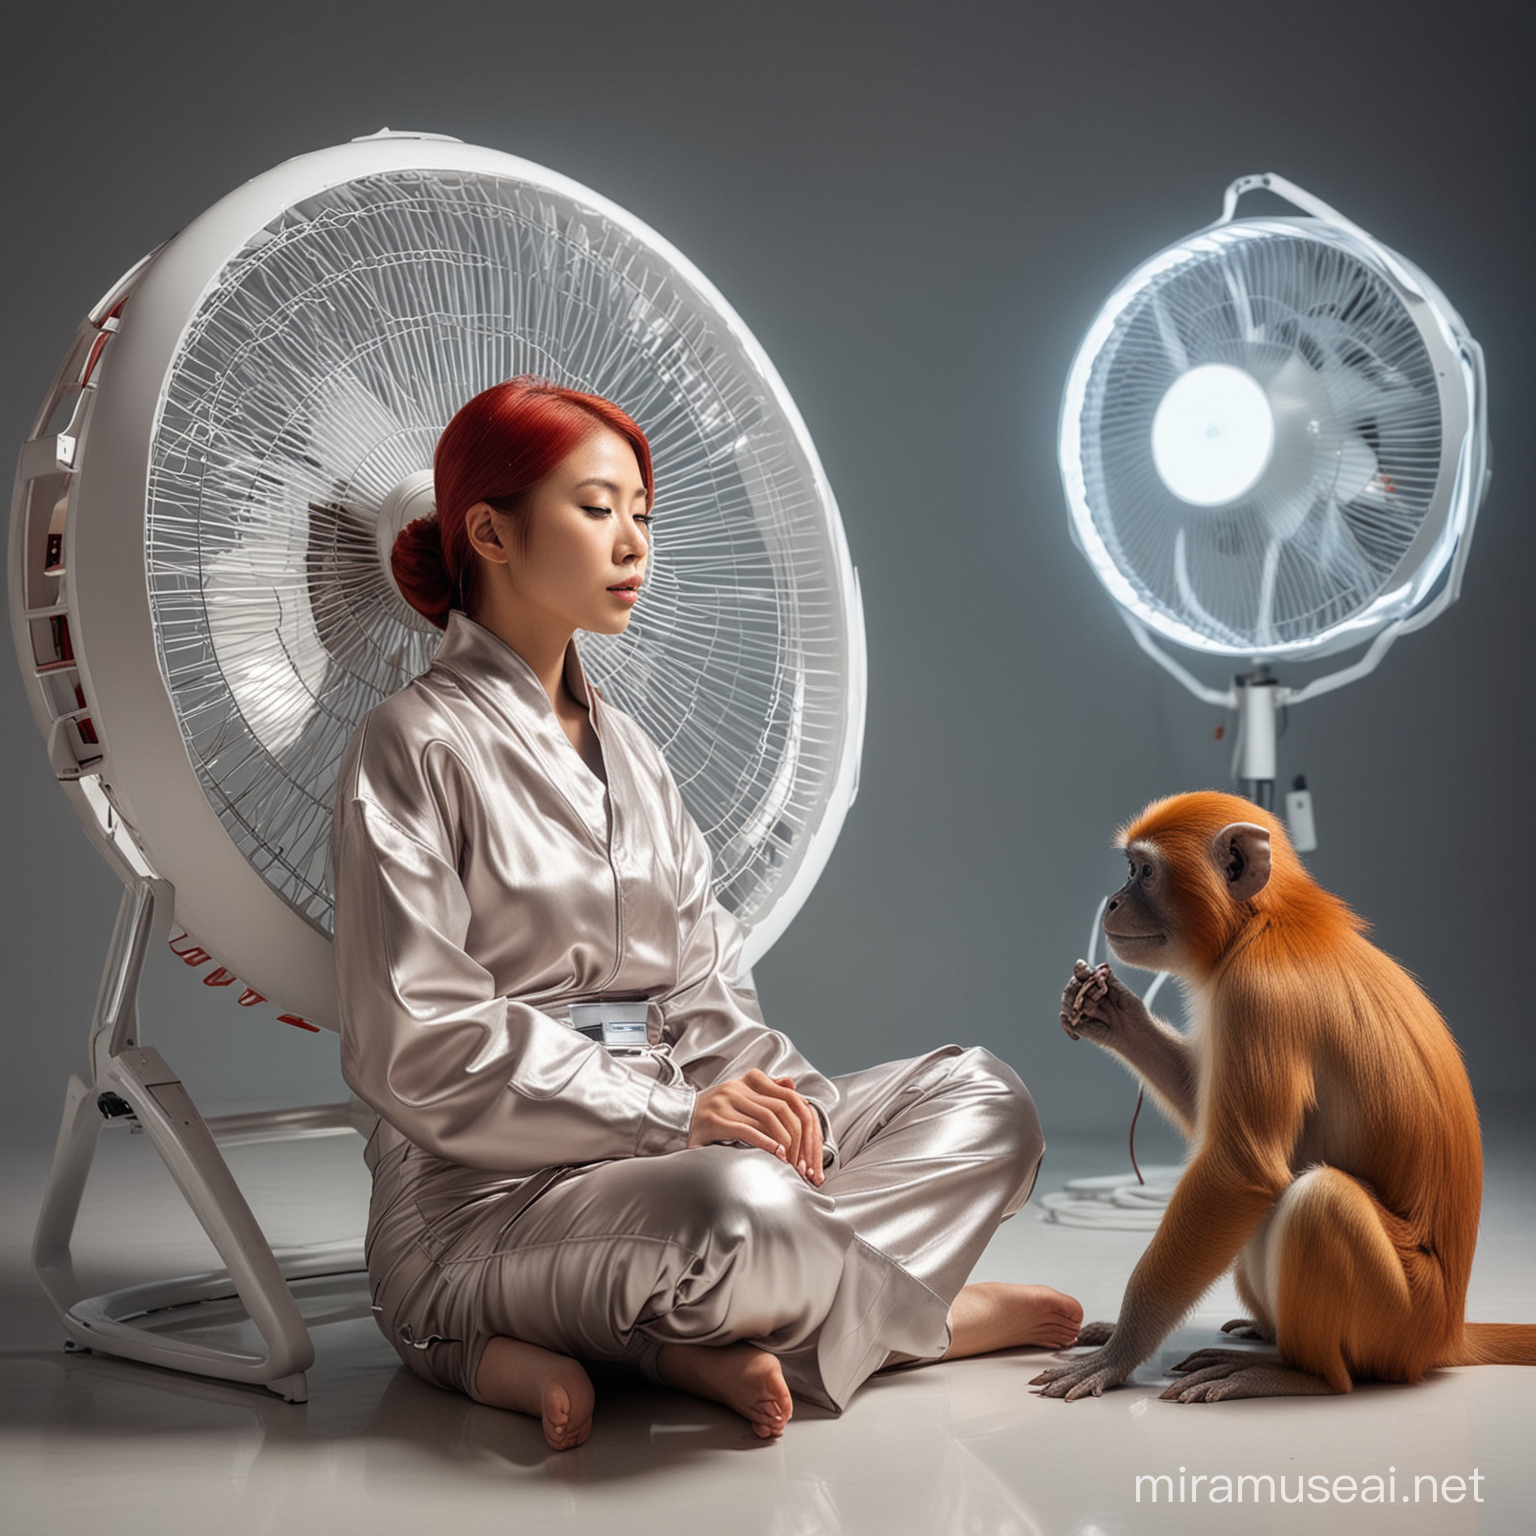 Futuristic Asian Woman with Red Hair and Monkey Relaxing in Airflow